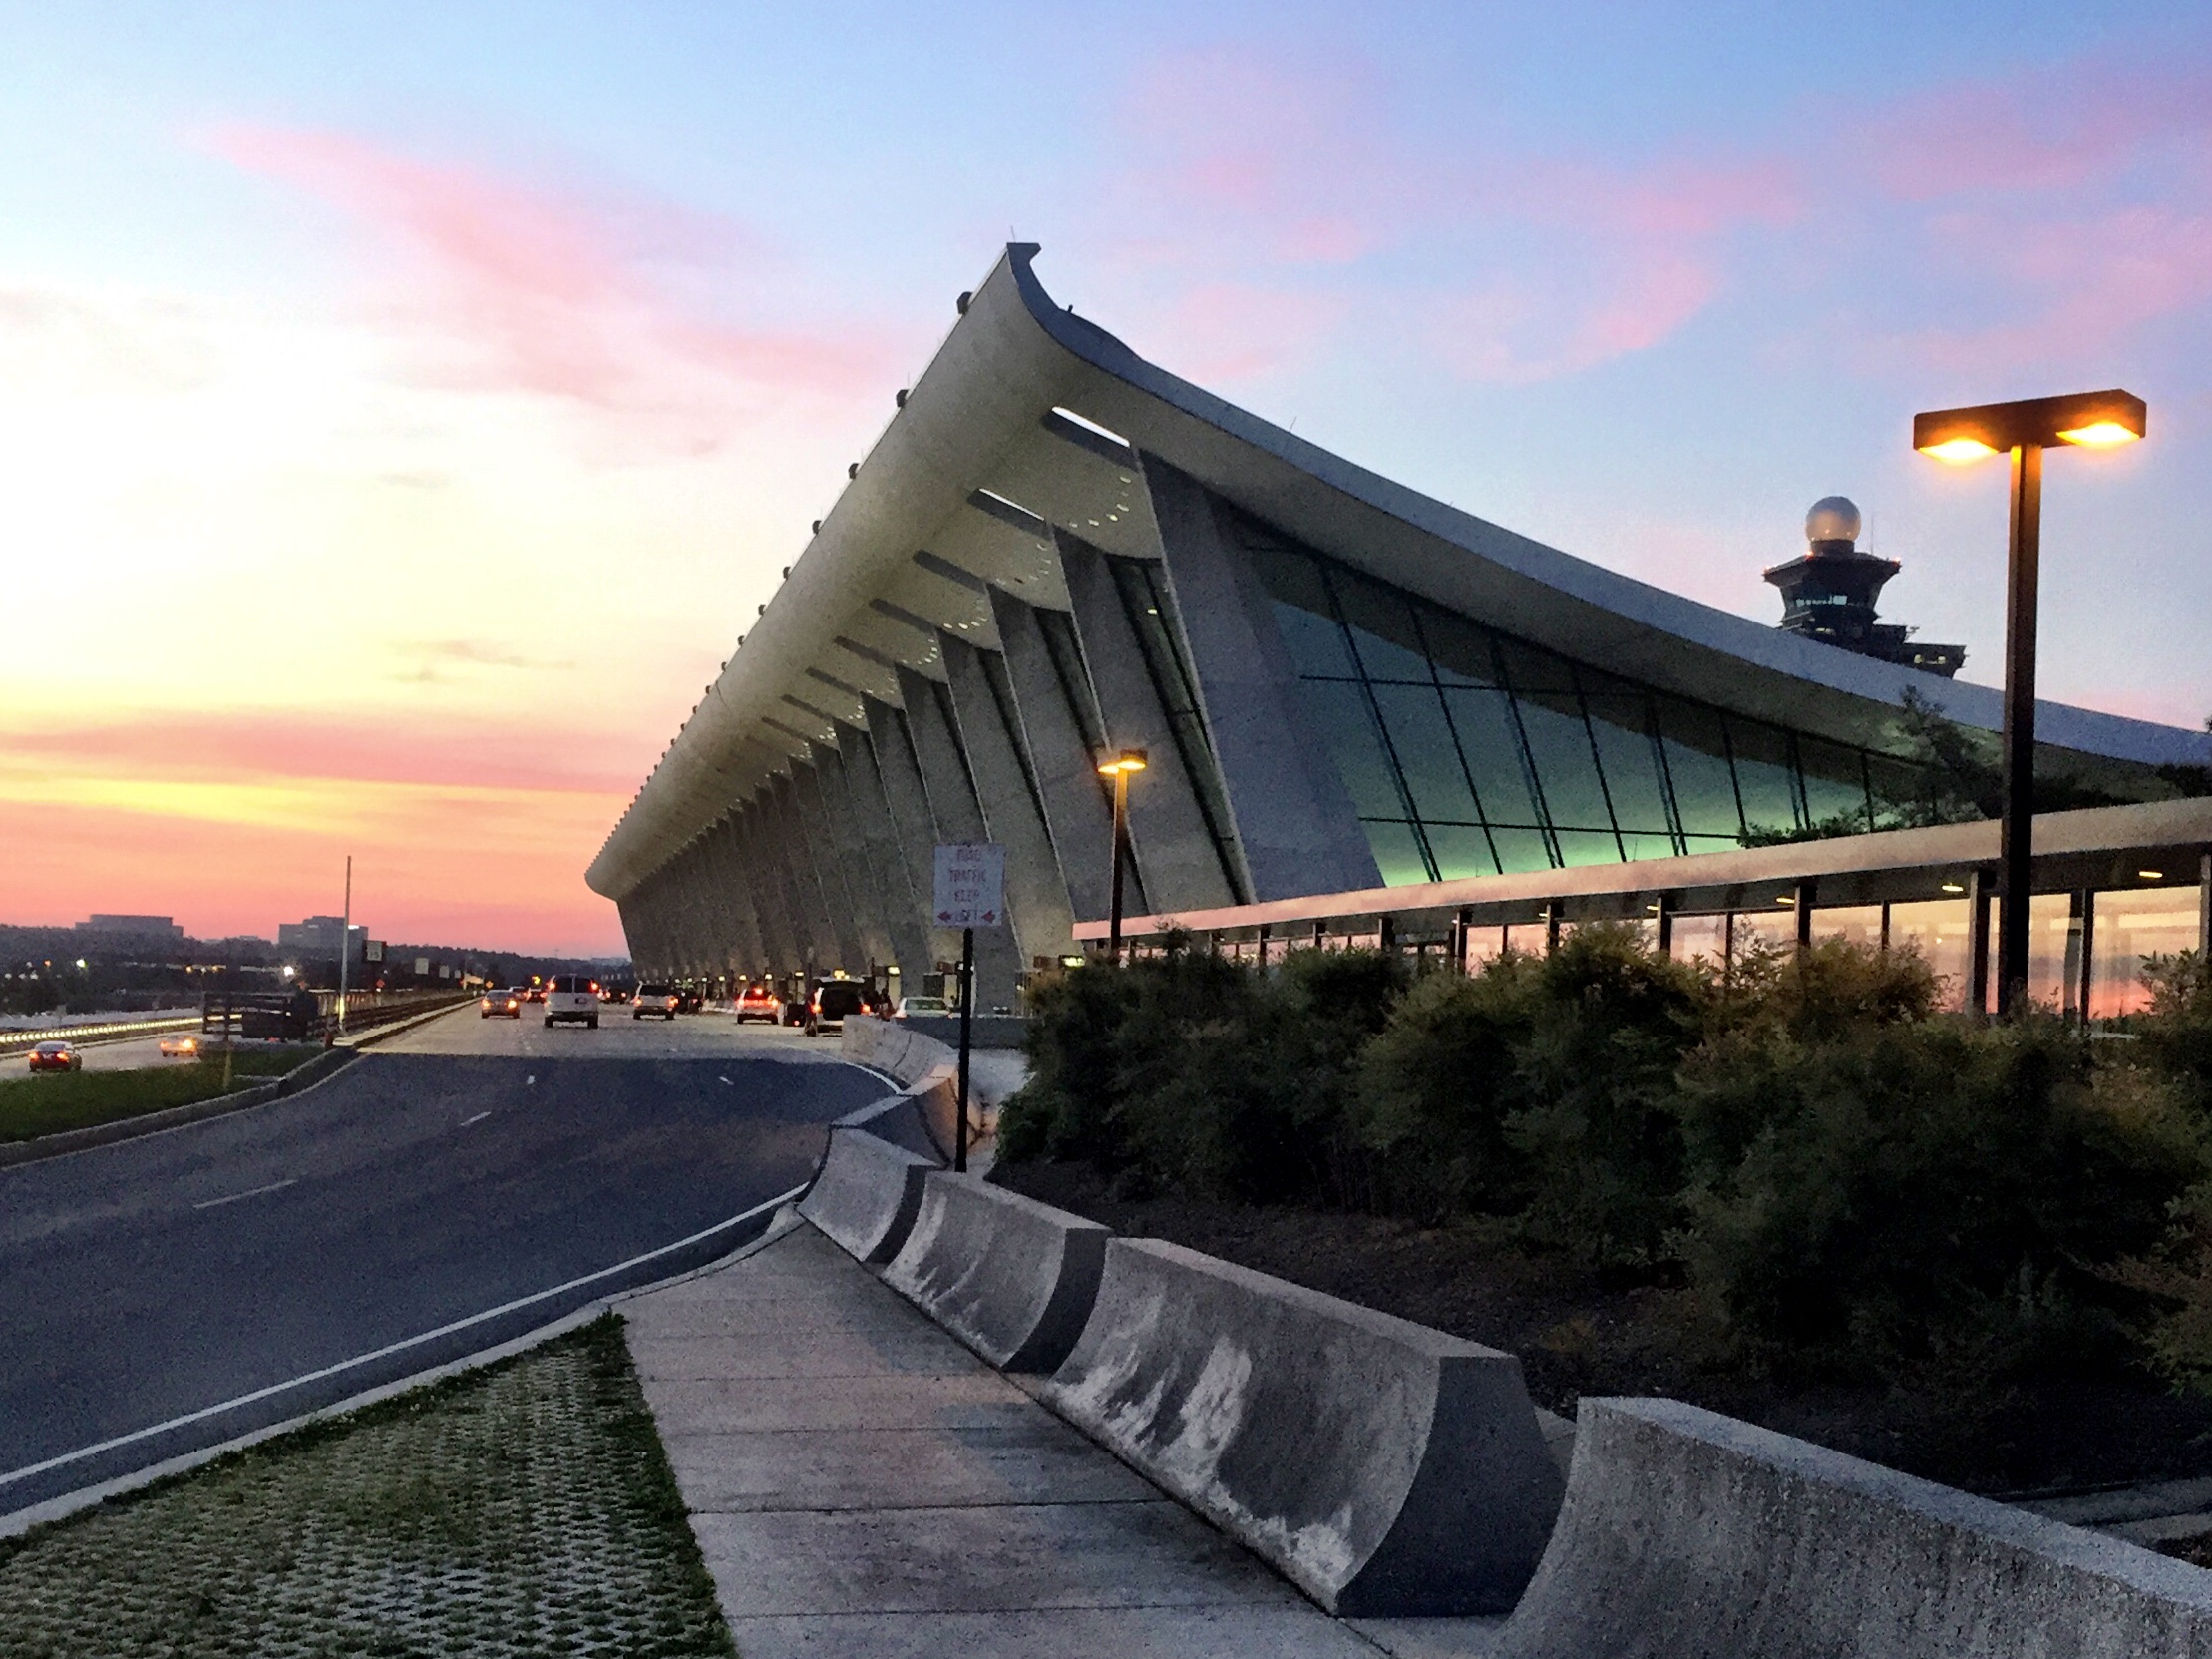 Coming soon: Nonstop flights to New Delhi from Dulles